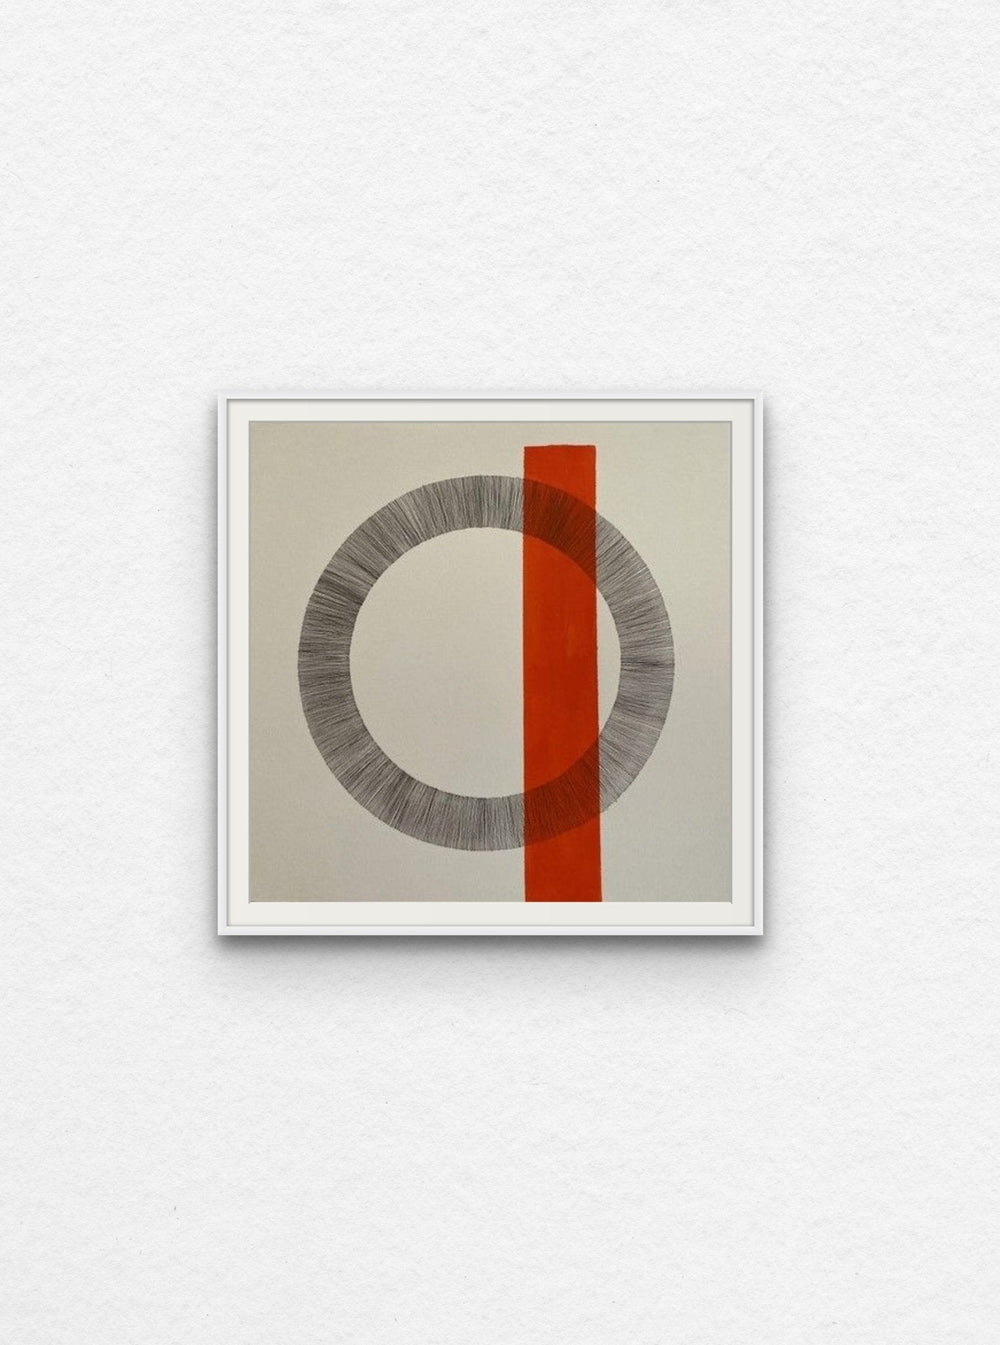 Ink drawing on paper of circle with orange acrylic shape floated in white frame. 